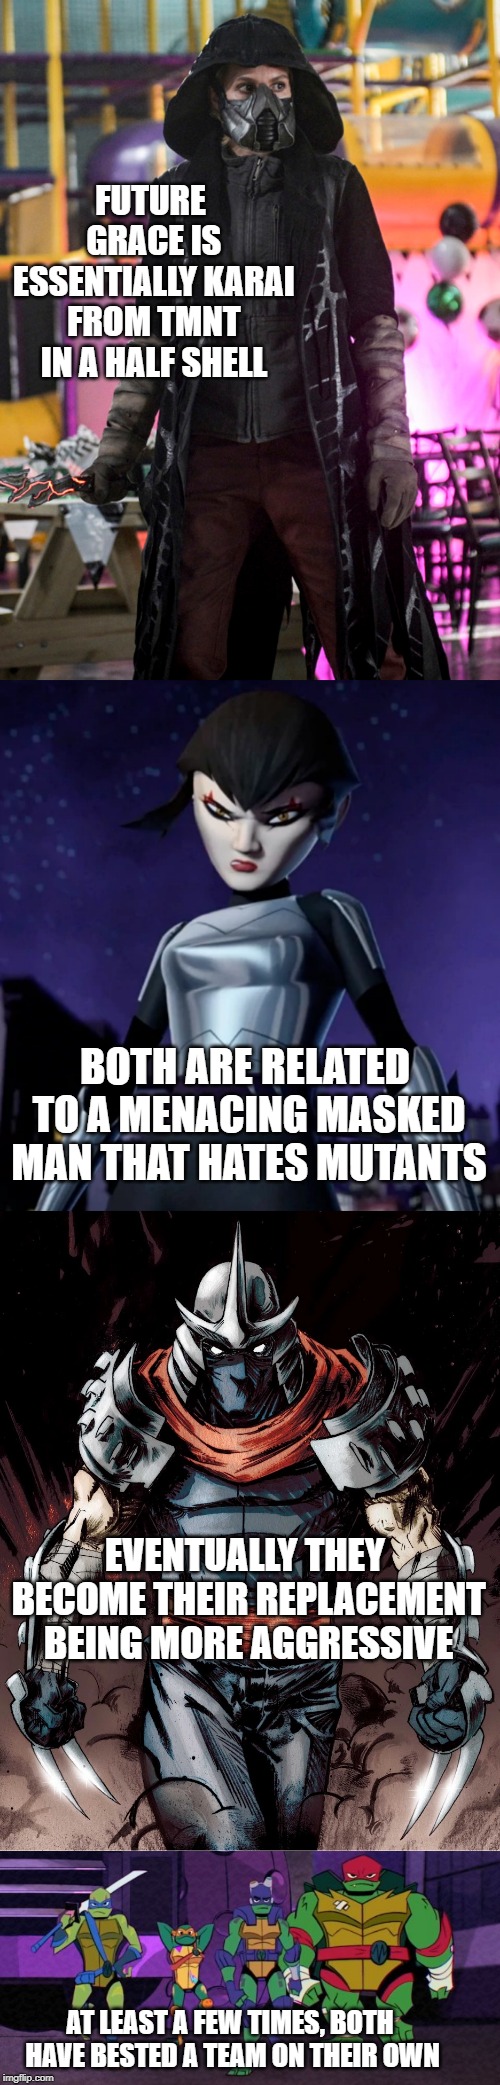 FUTURE GRACE IS ESSENTIALLY KARAI FROM TMNT IN A HALF SHELL; BOTH ARE RELATED TO A MENACING MASKED MAN THAT HATES MUTANTS; EVENTUALLY THEY BECOME THEIR REPLACEMENT BEING MORE AGGRESSIVE; AT LEAST A FEW TIMES, BOTH HAVE BESTED A TEAM ON THEIR OWN | image tagged in dc comics,the flash,tmnt,villains,team | made w/ Imgflip meme maker